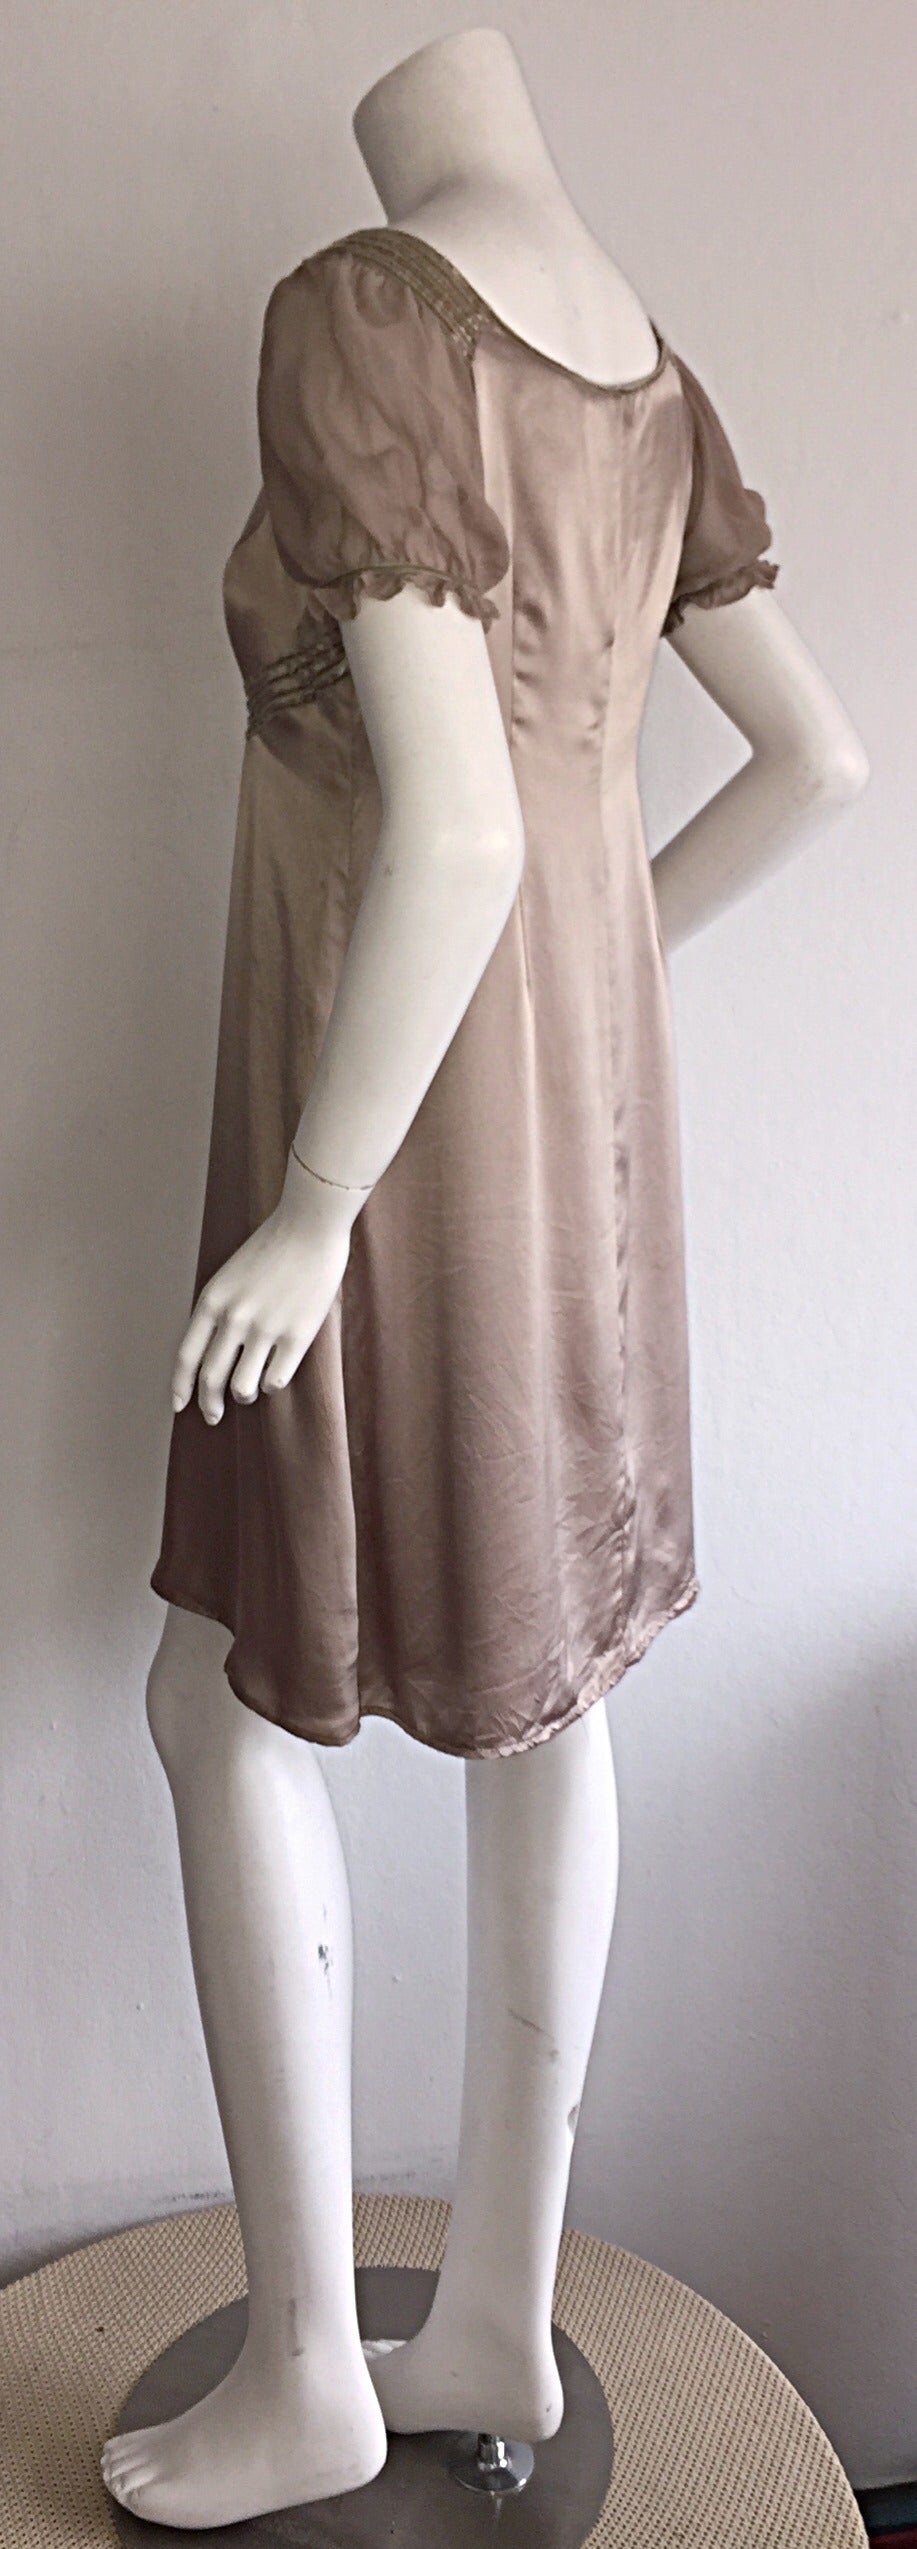 Marc Jacobs Champagne Gold / Beige ' Fluid ' Silk Romantic Babydoll Dress In Excellent Condition For Sale In San Diego, CA